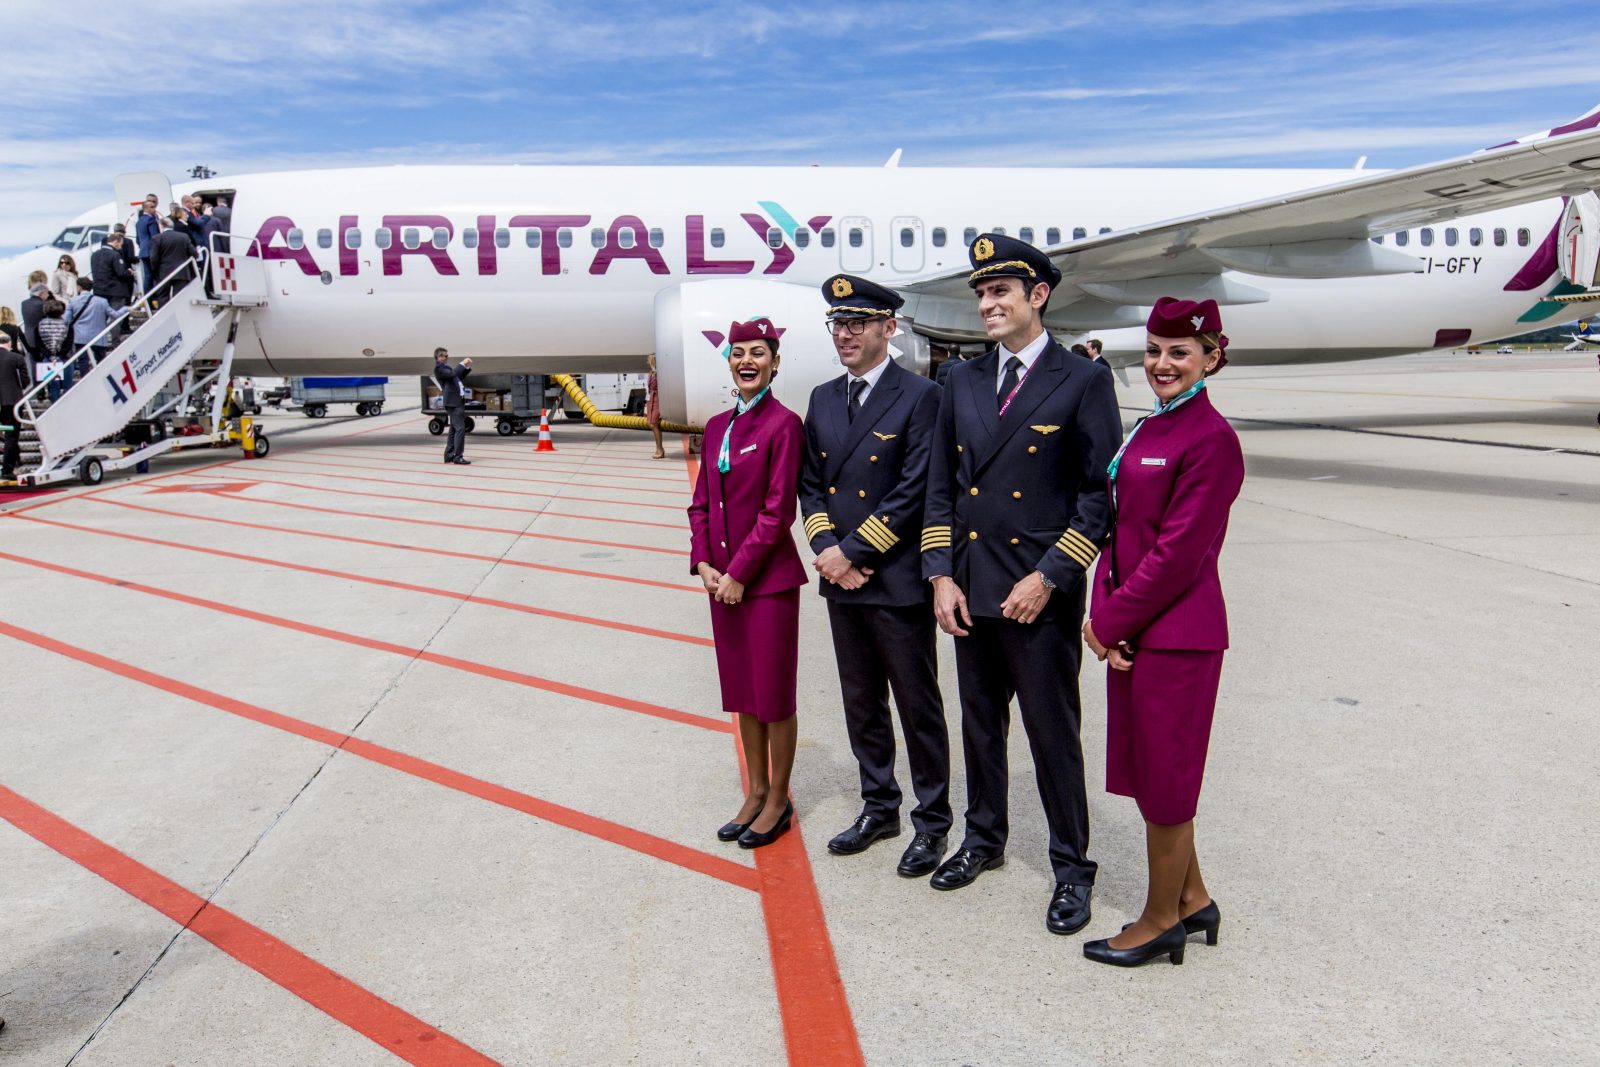 Qatar Airways: Investment in Air Italy "Fully Compliant" With Open Skies Agreement